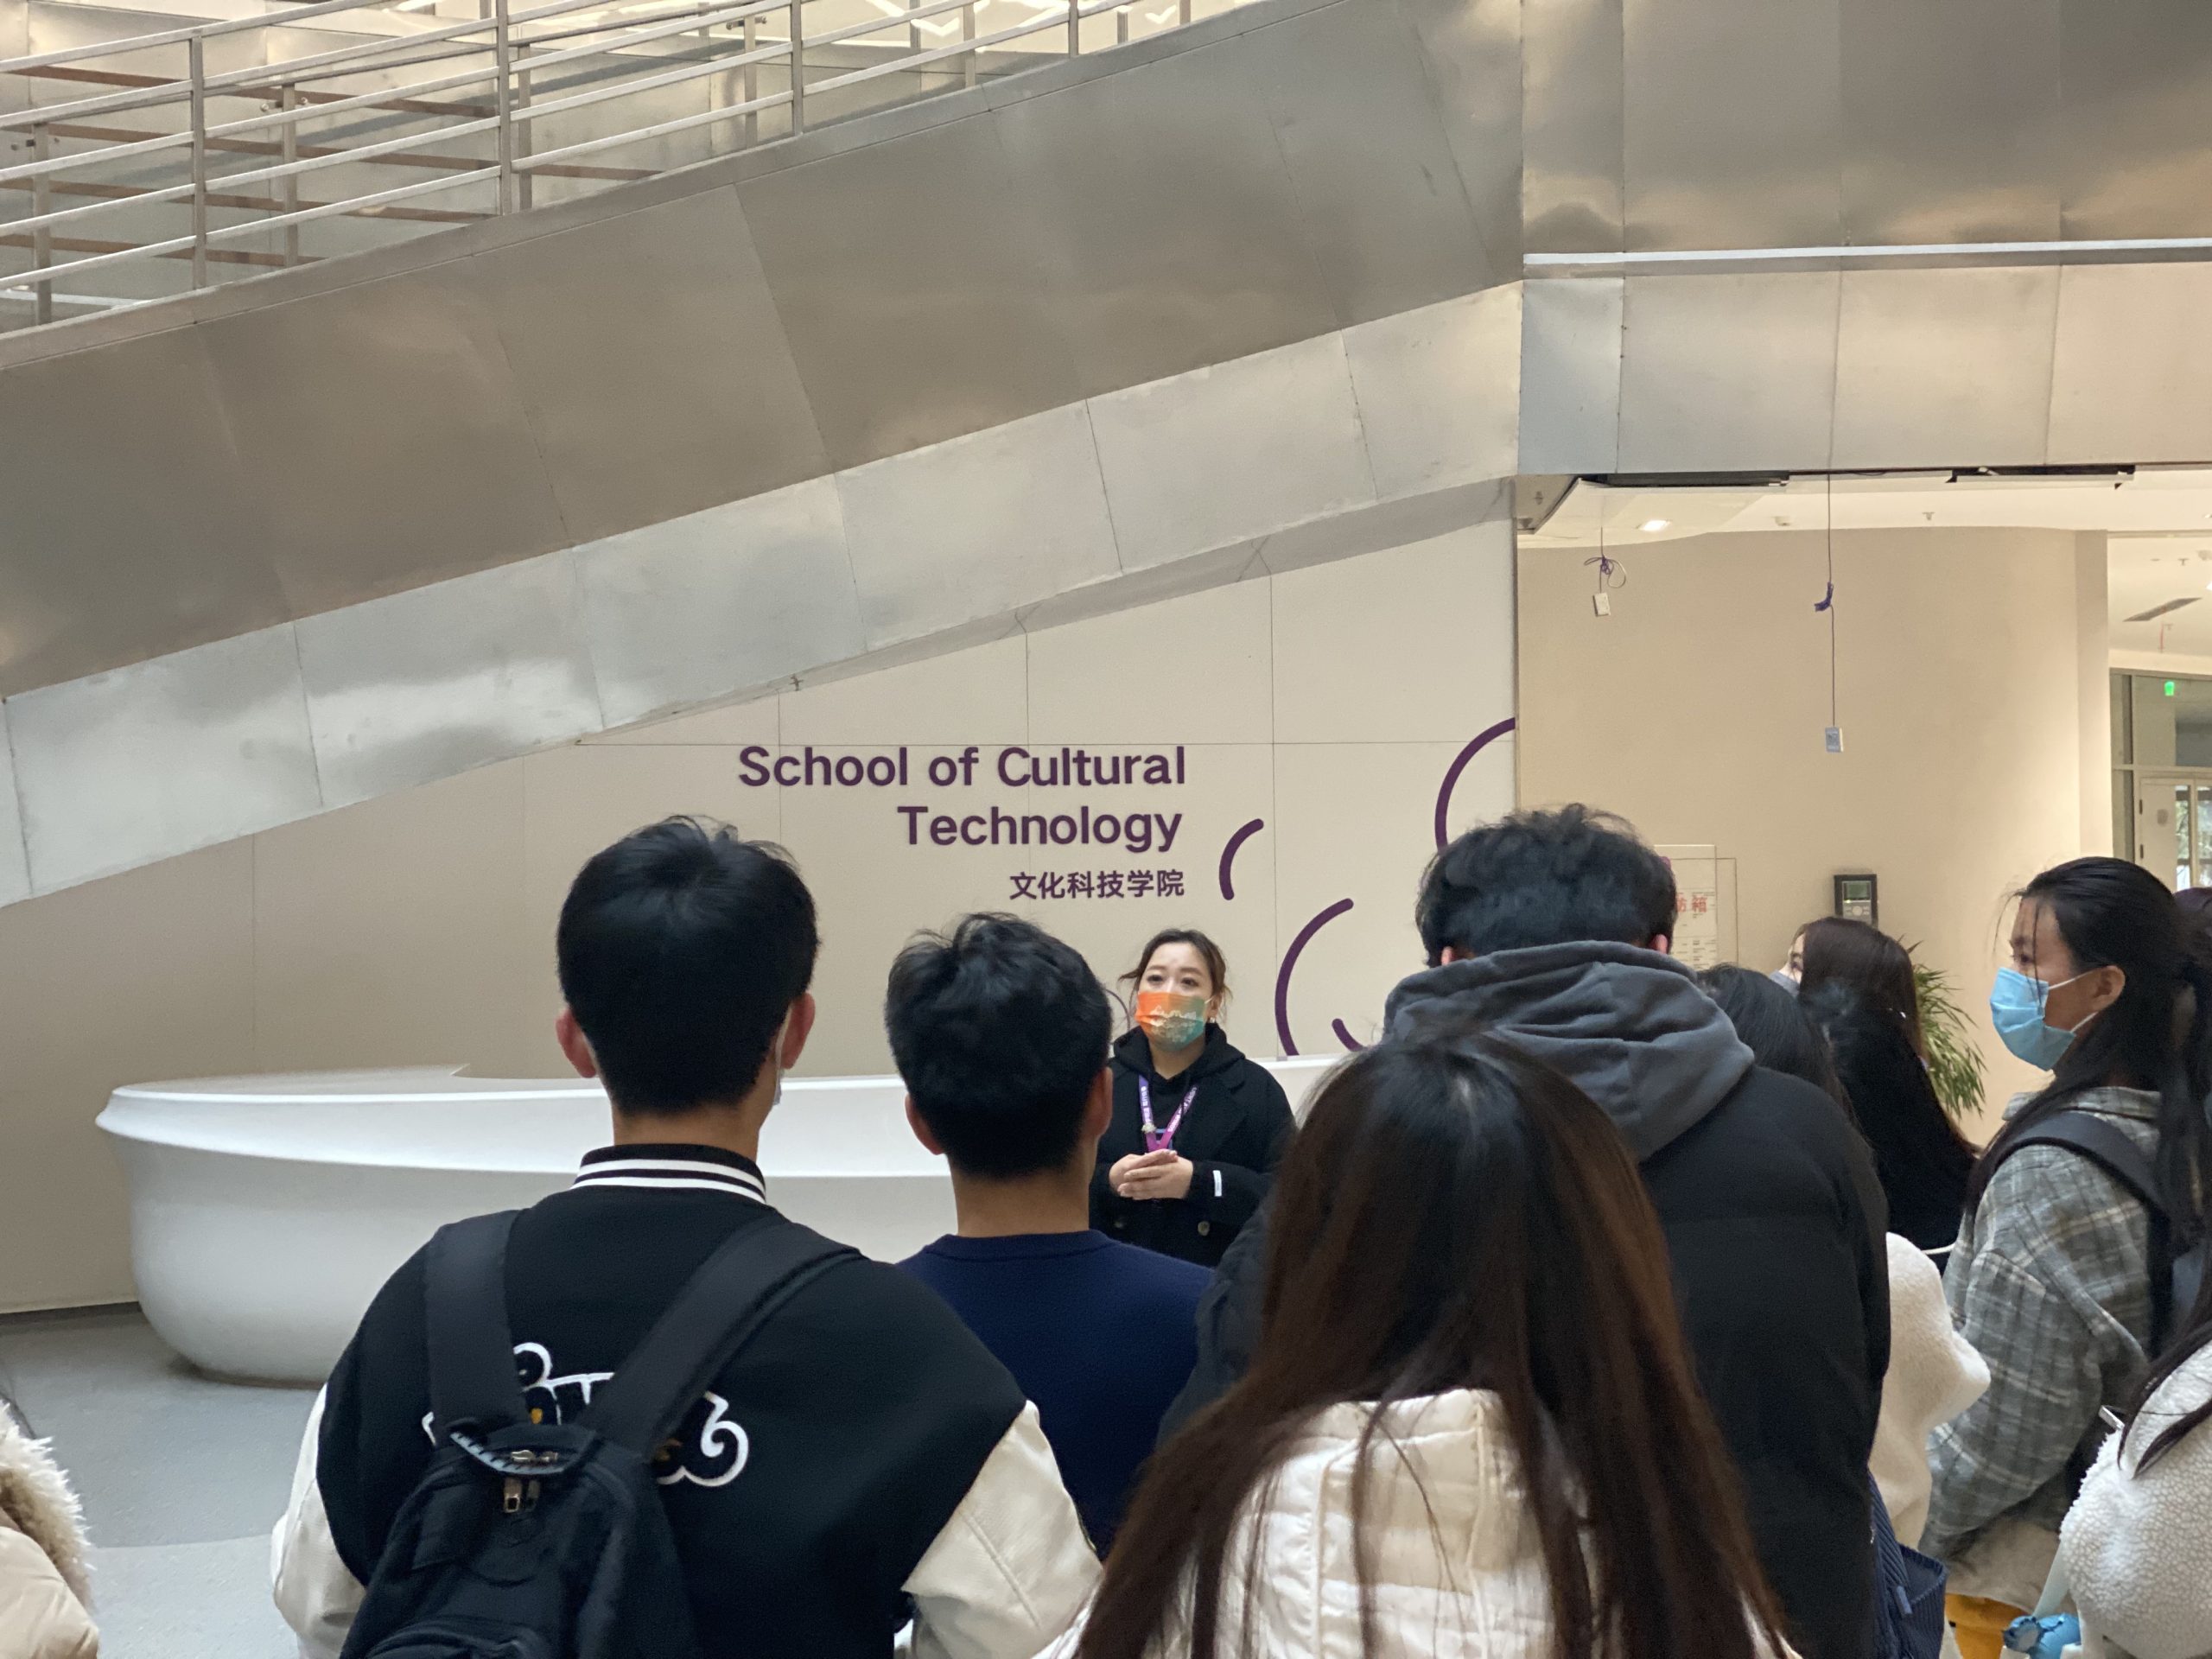 School of Cultural Technology participated in the Annual Career Talk event